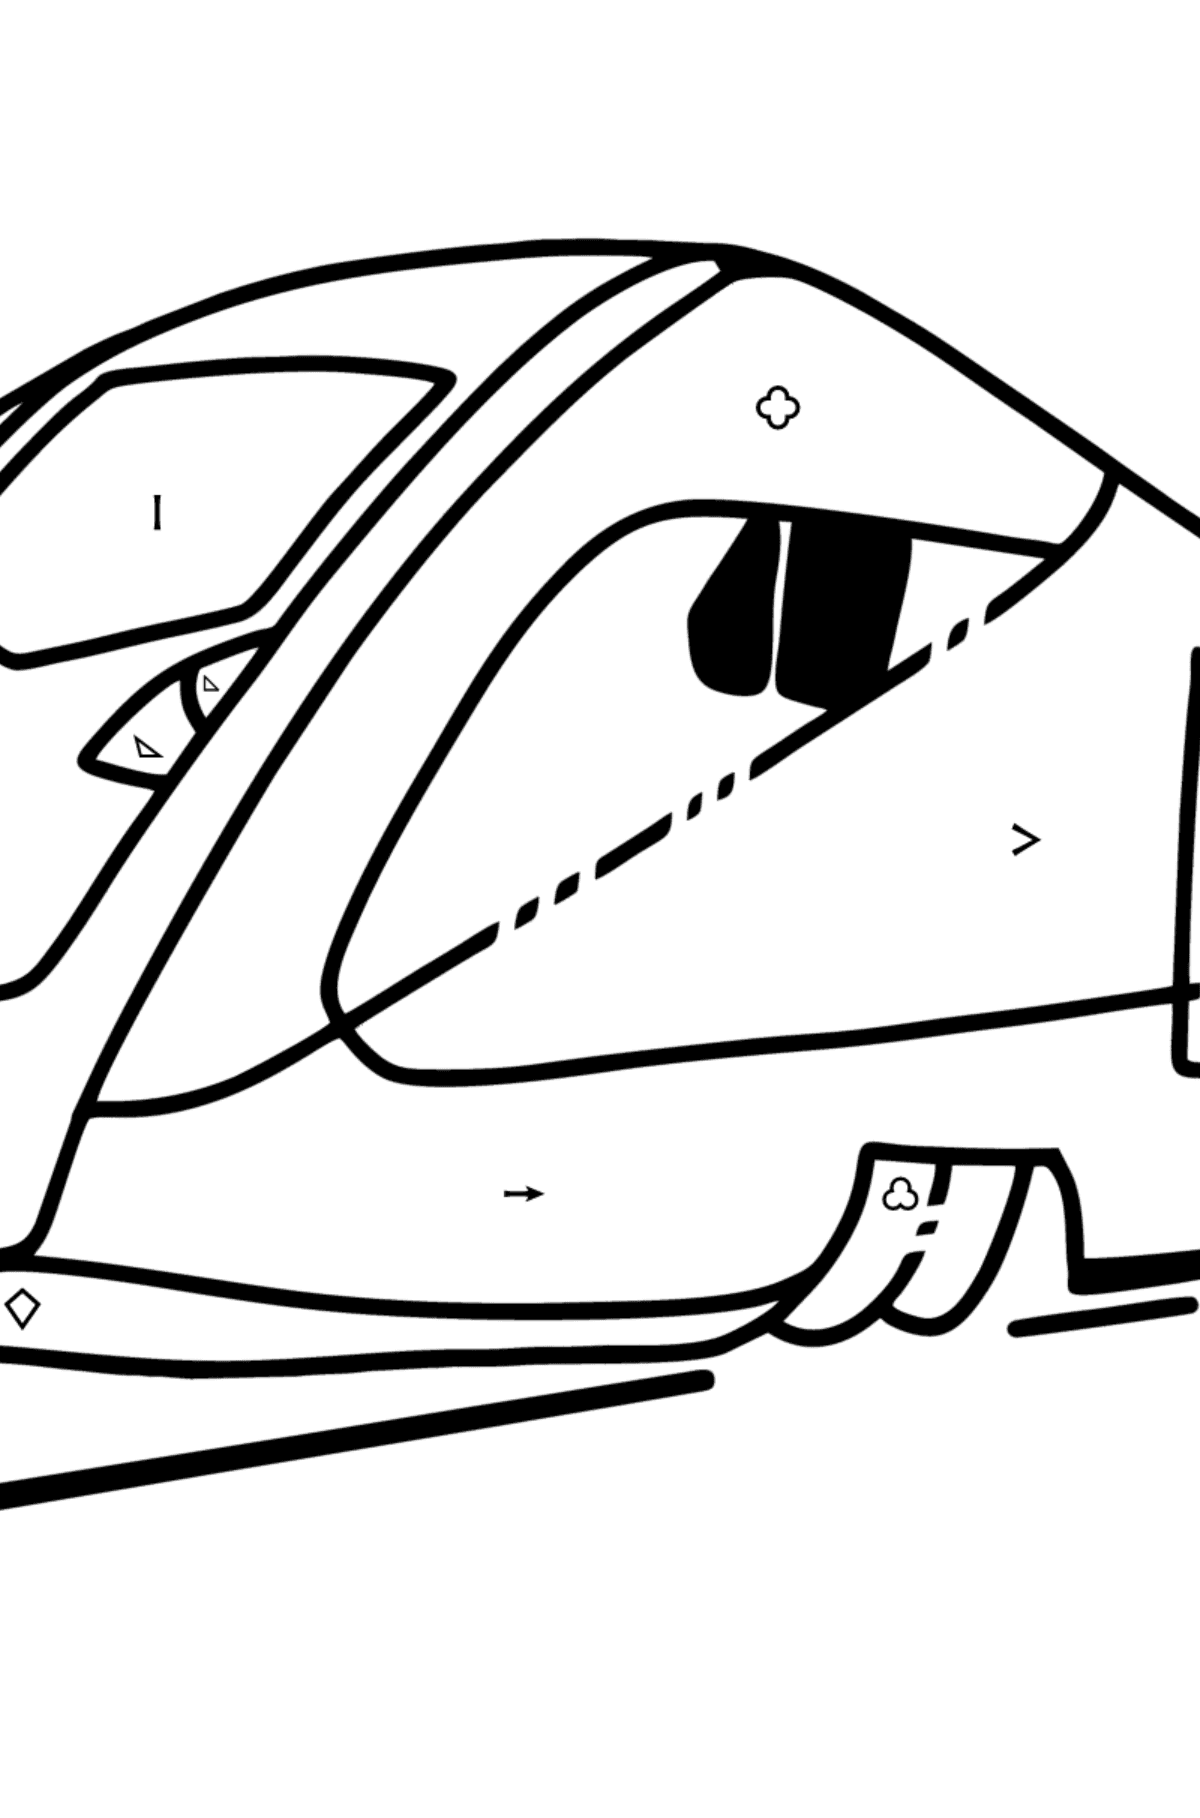 Train coloring page for children - Coloring by Symbols and Geometric Shapes for Kids